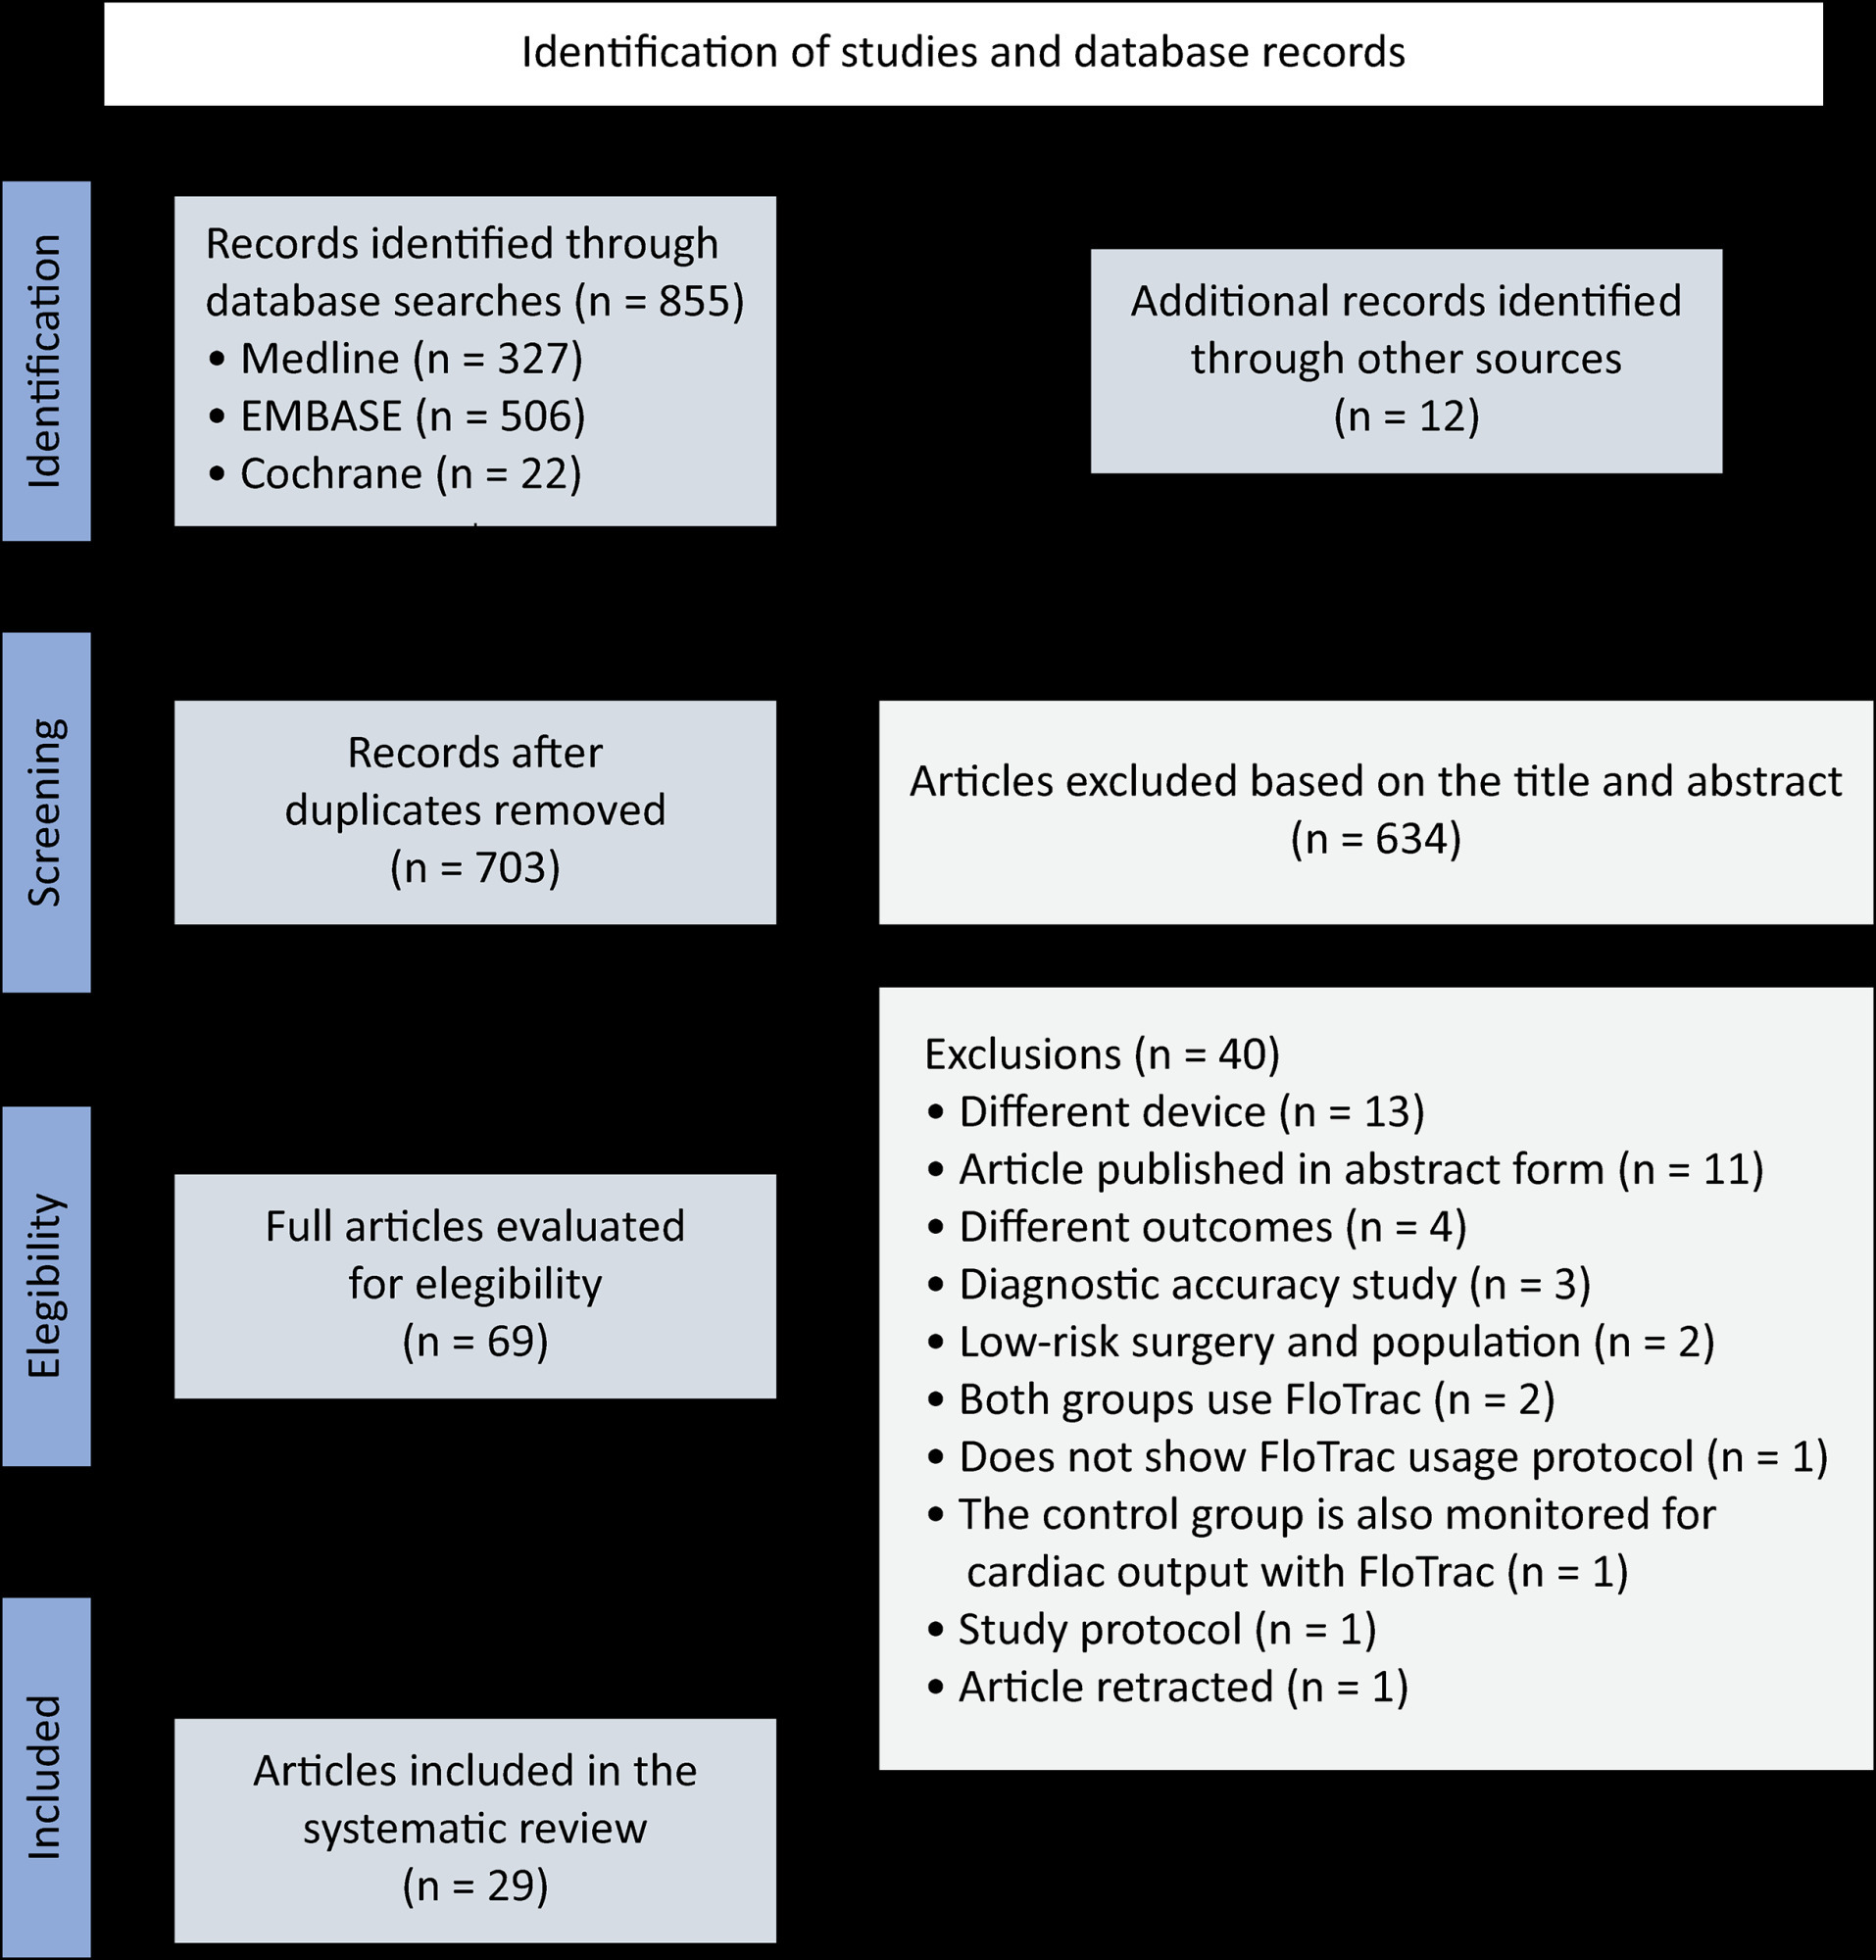 Goal-directed therapy guided by the FloTrac sensor in major surgery: a systematic review and meta-analysis